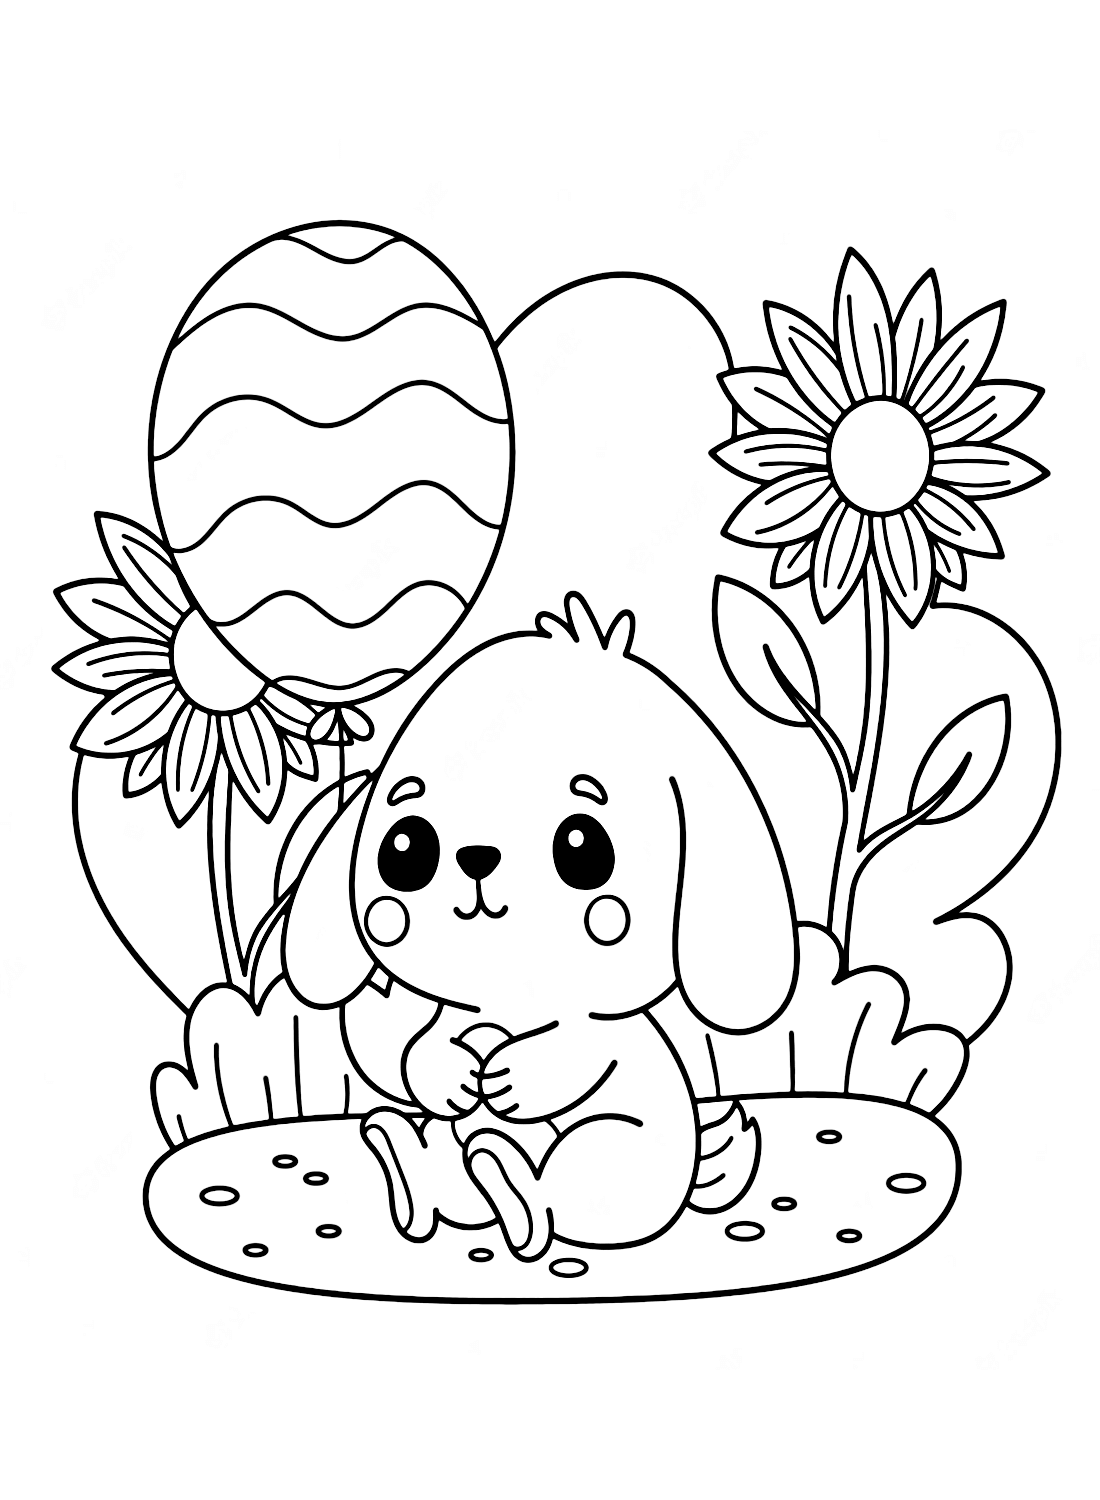 Crayola Coloring Pages Cute from Crayola